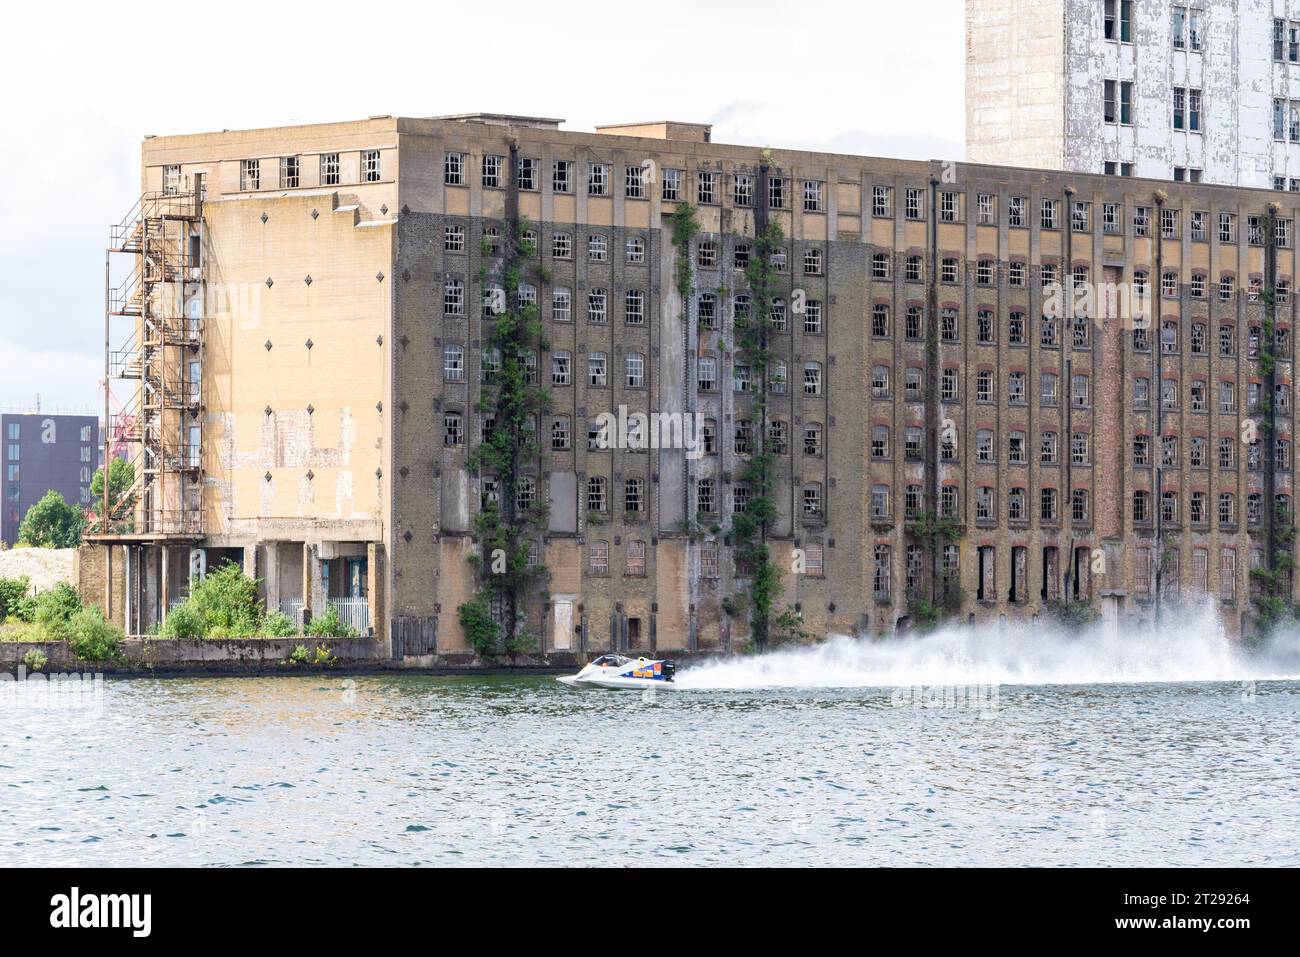 Disused Rank Hovis Premier Mill warehouse on Royal Victoria Dock, Docklands, Newham, London, UK. Built 1904, closed 1980s. Powerboat racing past Stock Photo